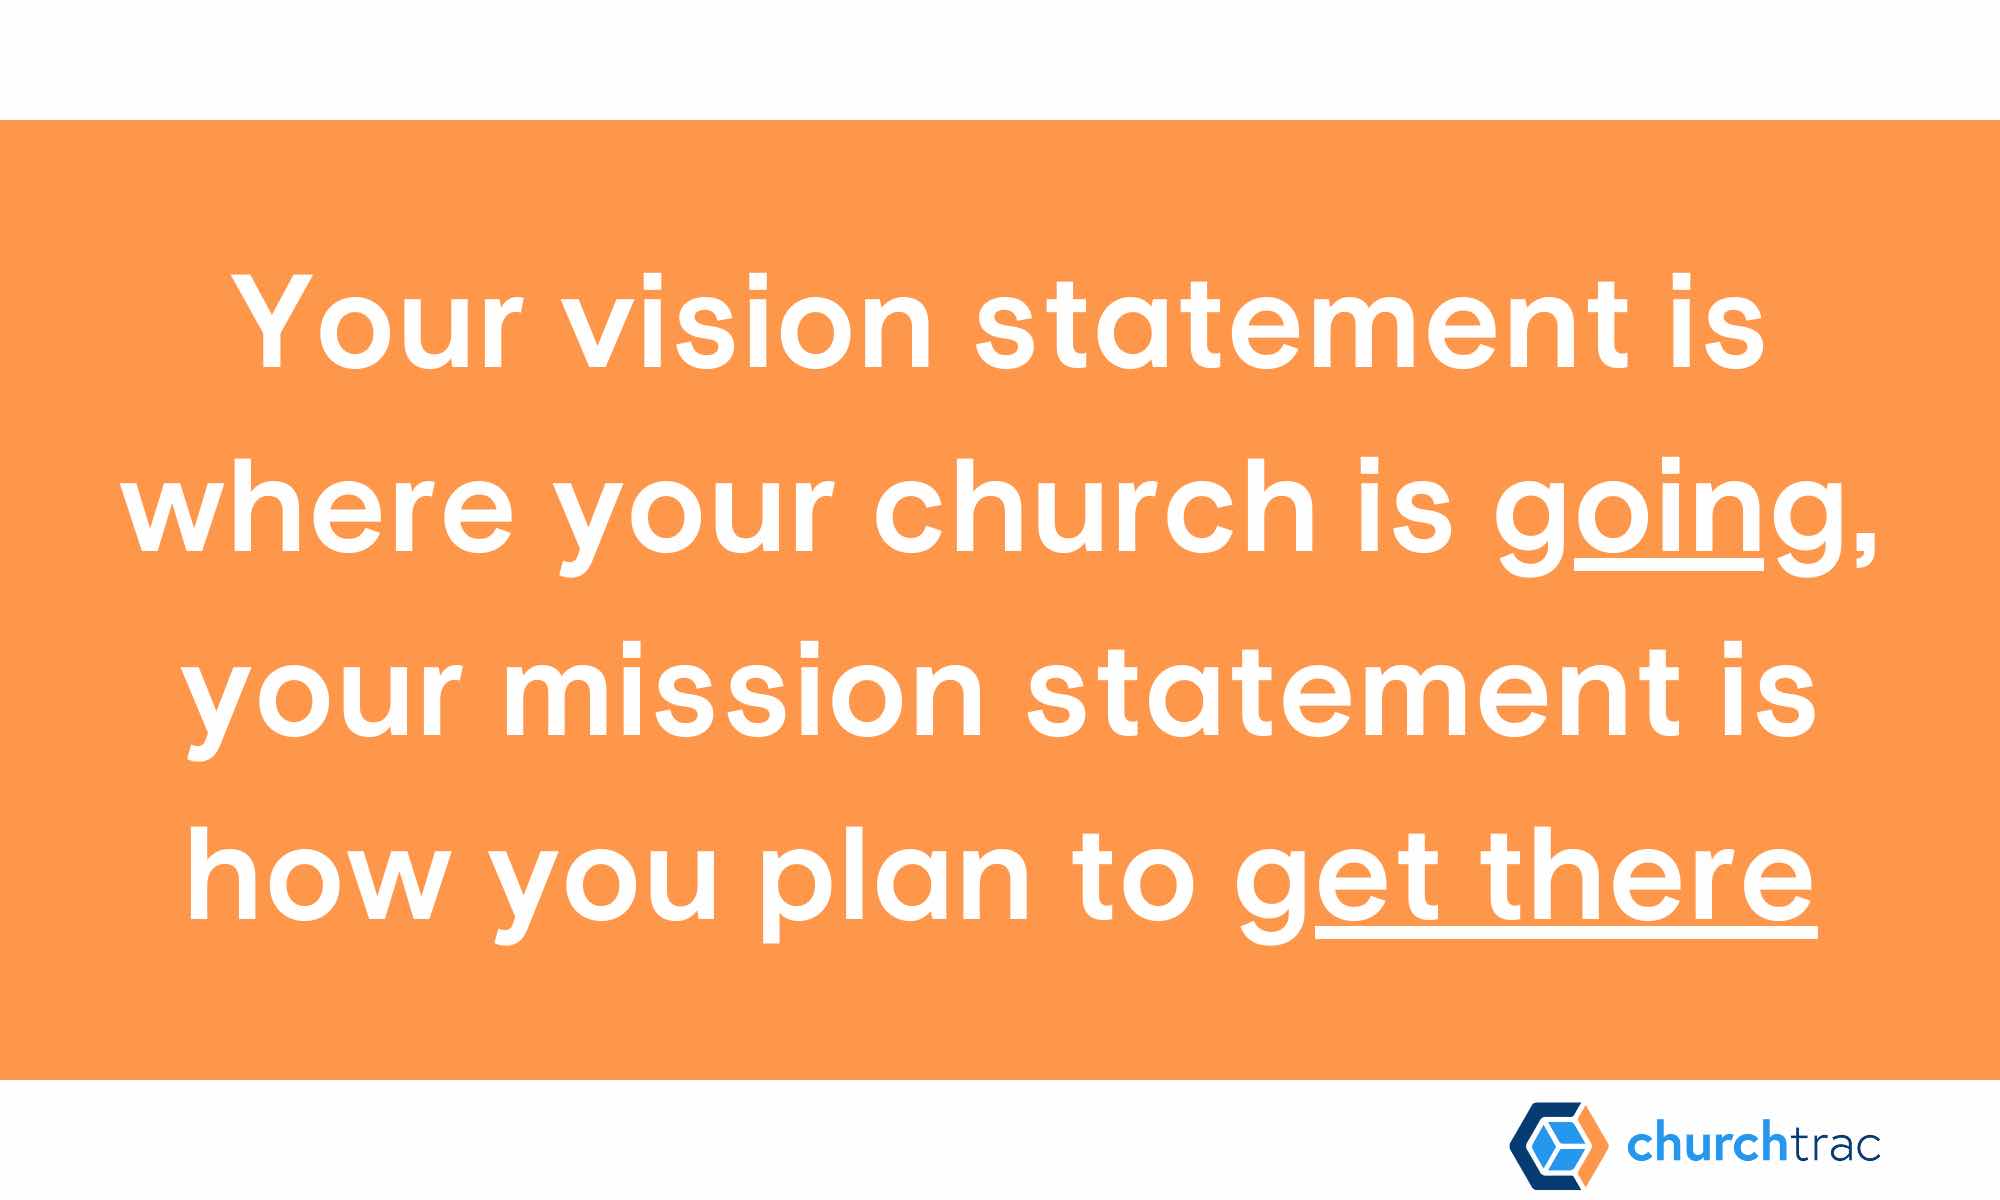 Your vision statement is where your church is going, your mission statement is how you plan to get there